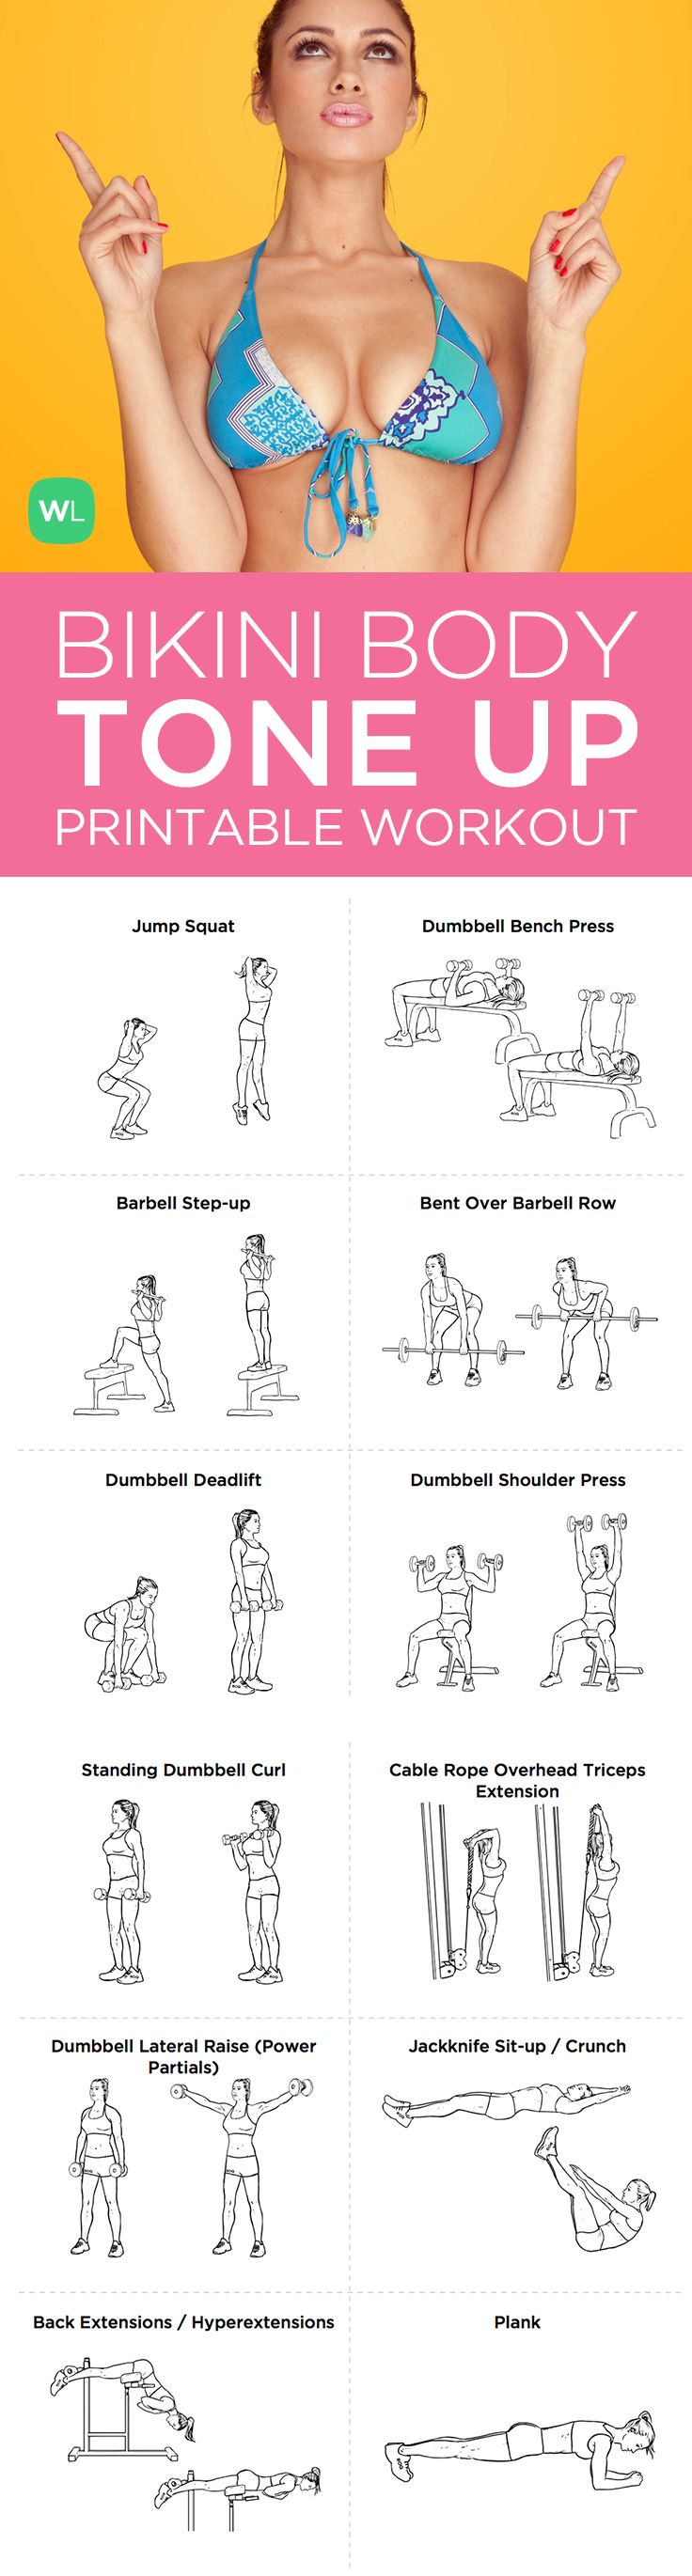 9 Best Images of Printable Workout Plans - Printable Workout Weight